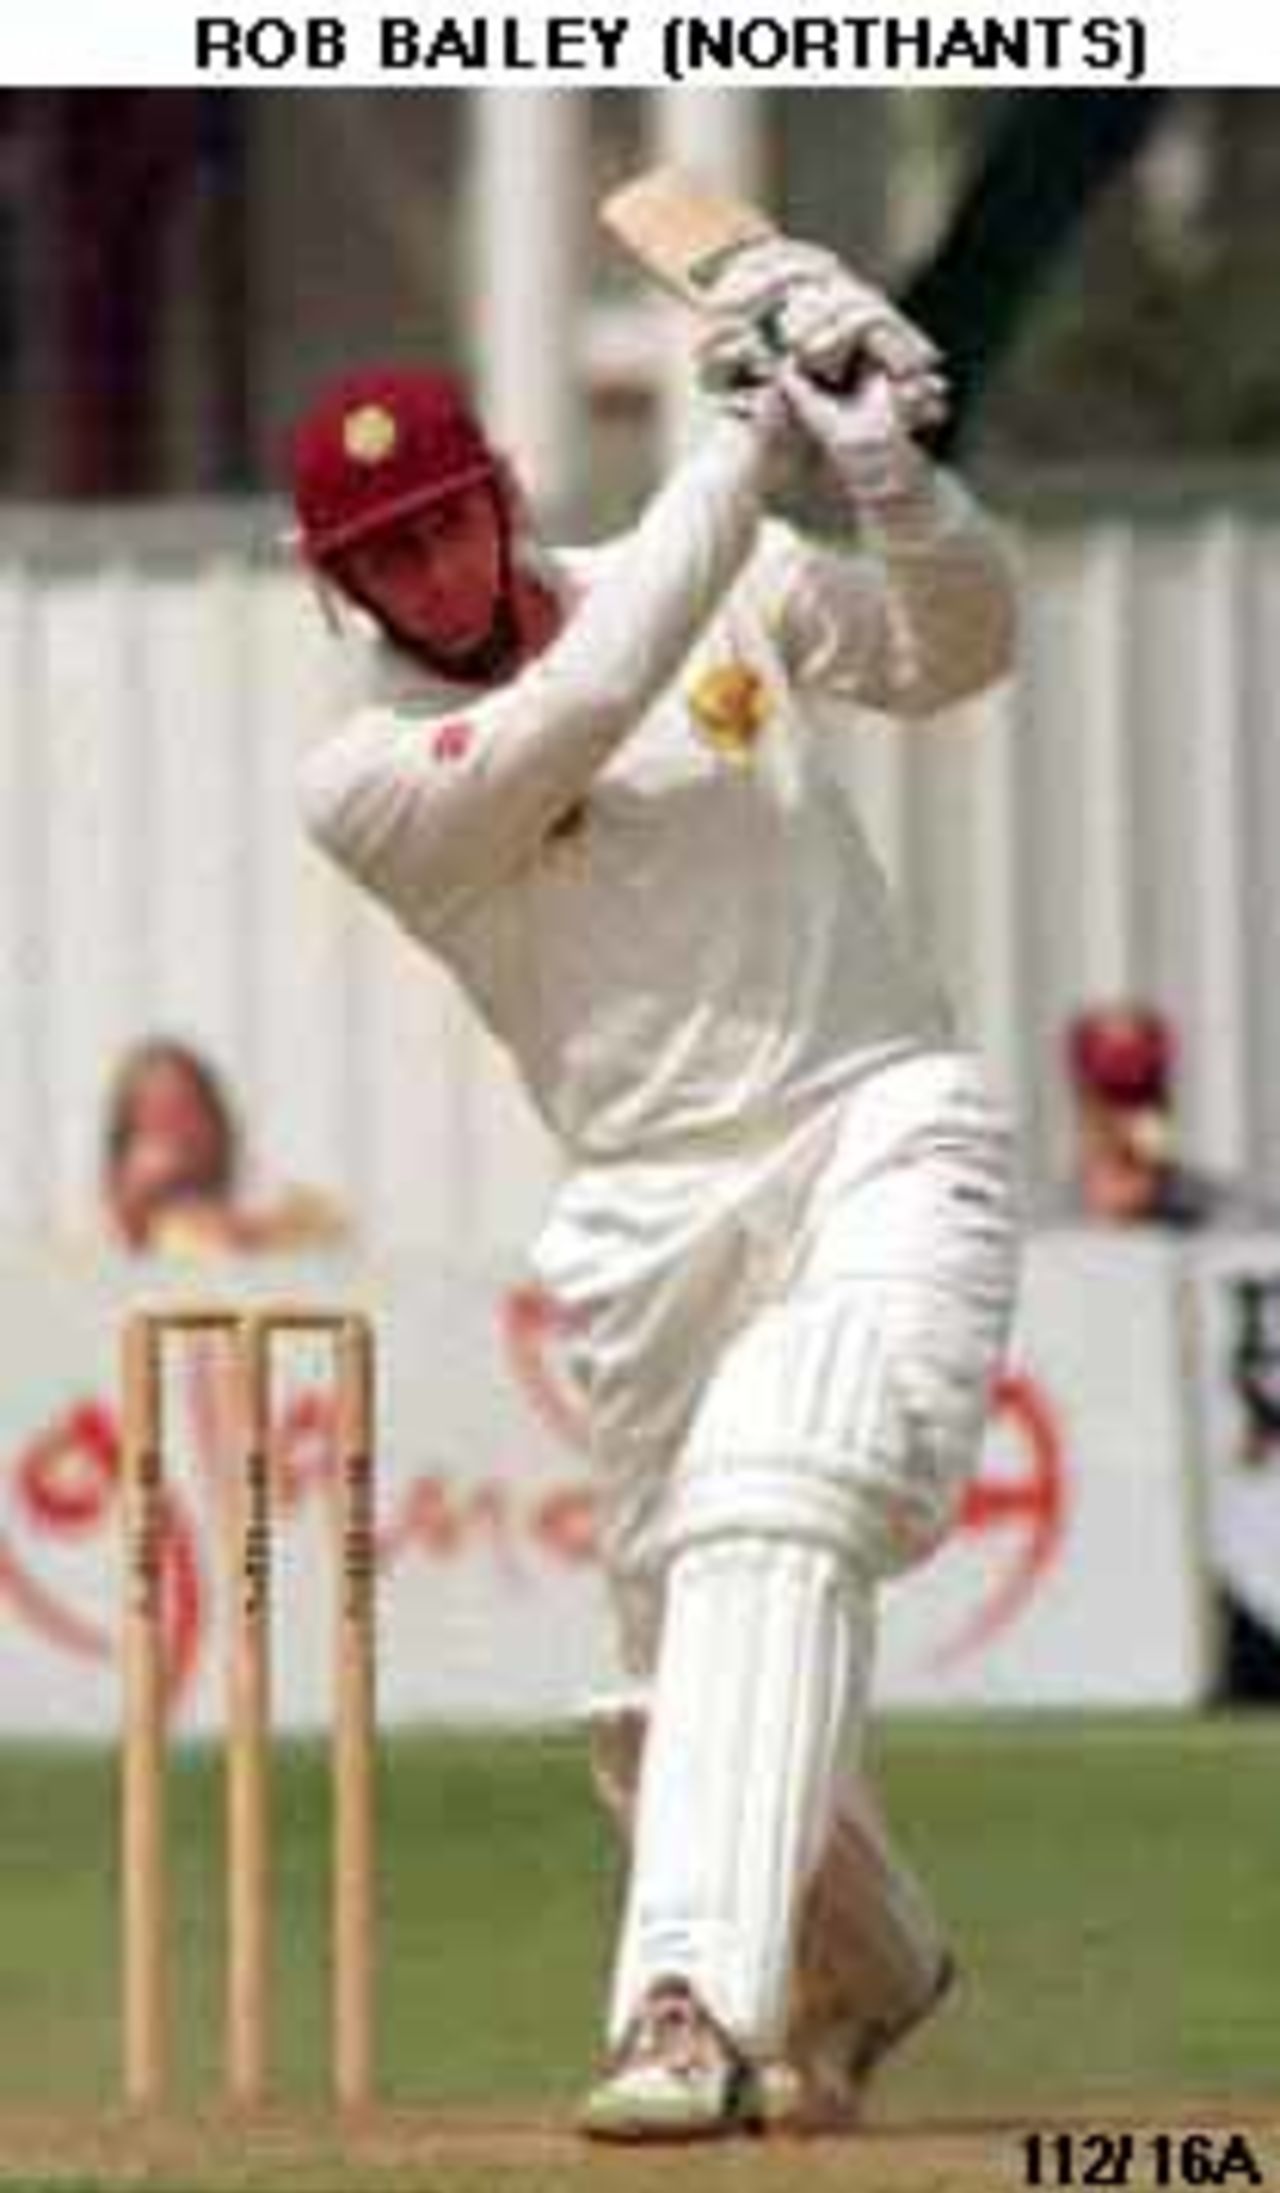 Rob Bailey of Northants swings at the ball